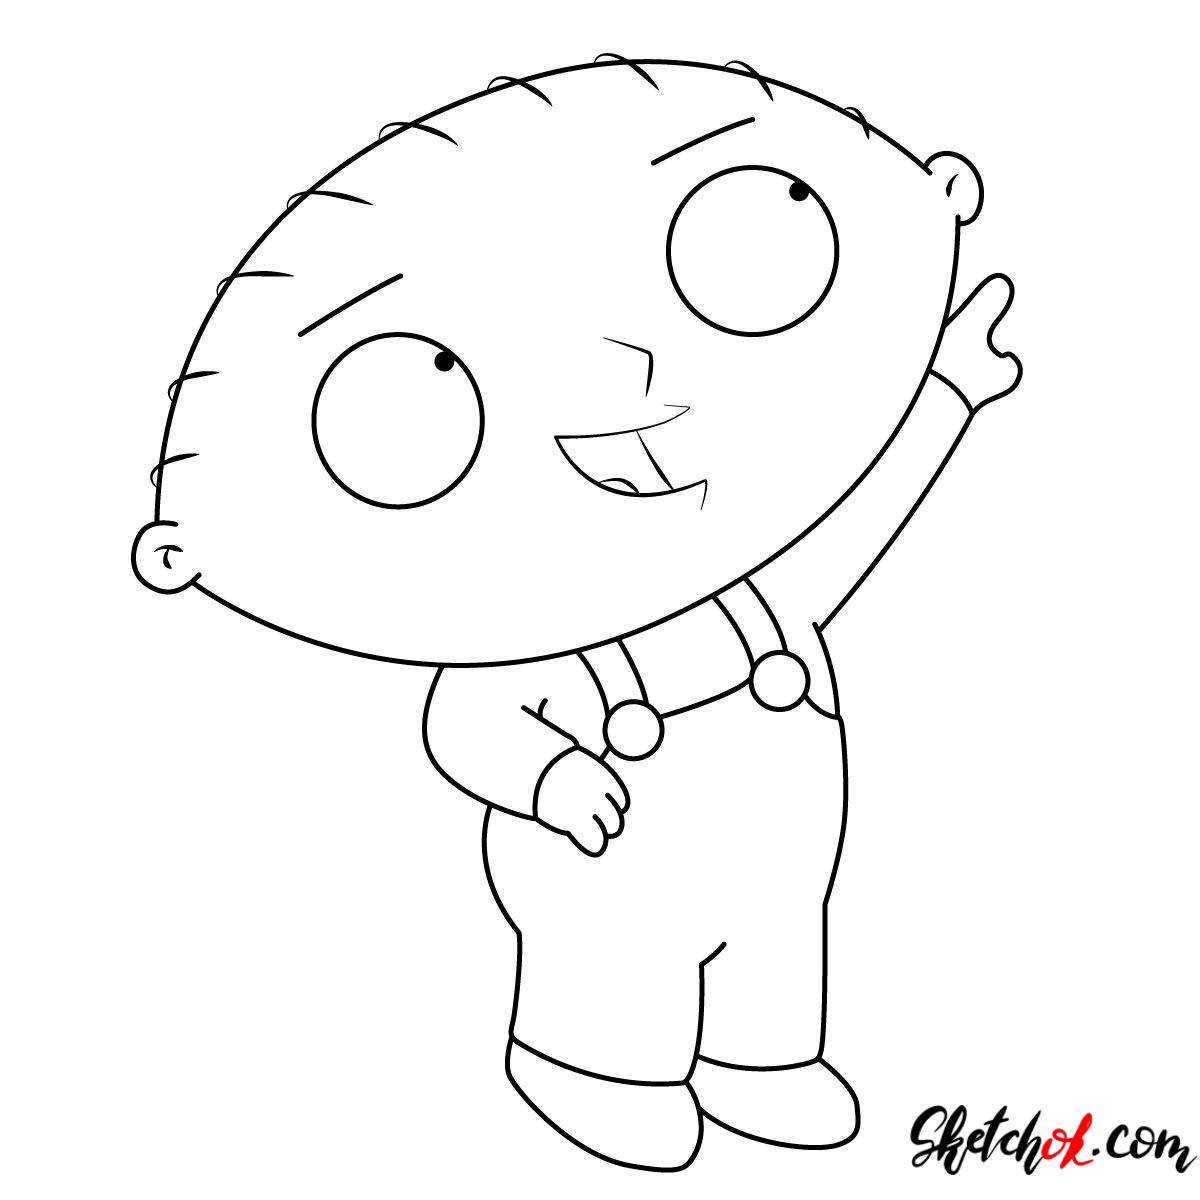 How to draw Stewie Griffin Sketchok easy drawing guides